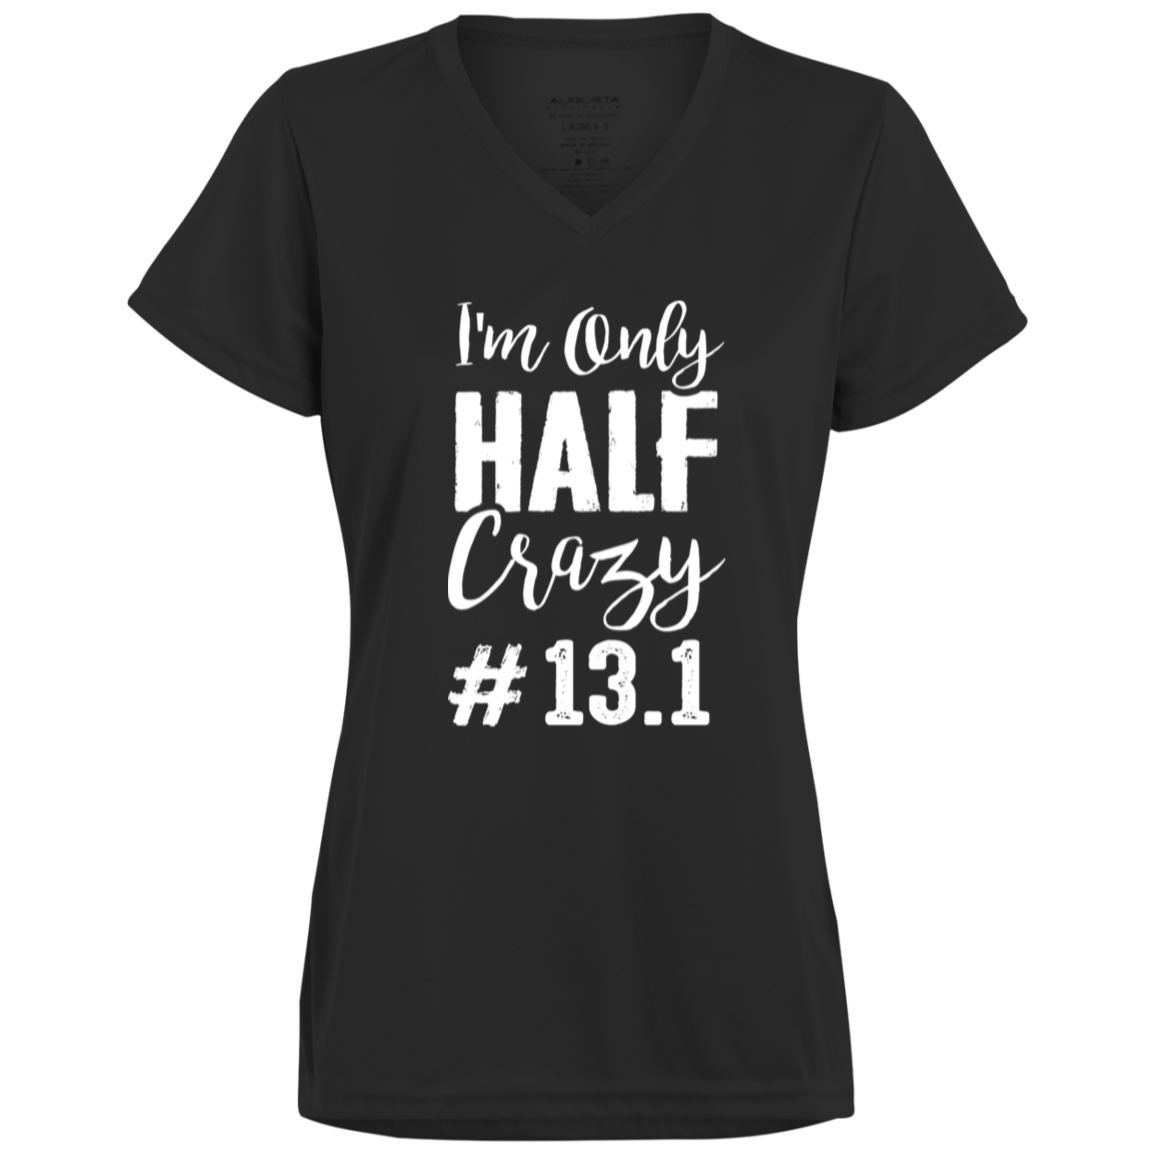 I'm Only Half Crazy - 13.1 - Moisture Wicking T-Shirts/Hoodies